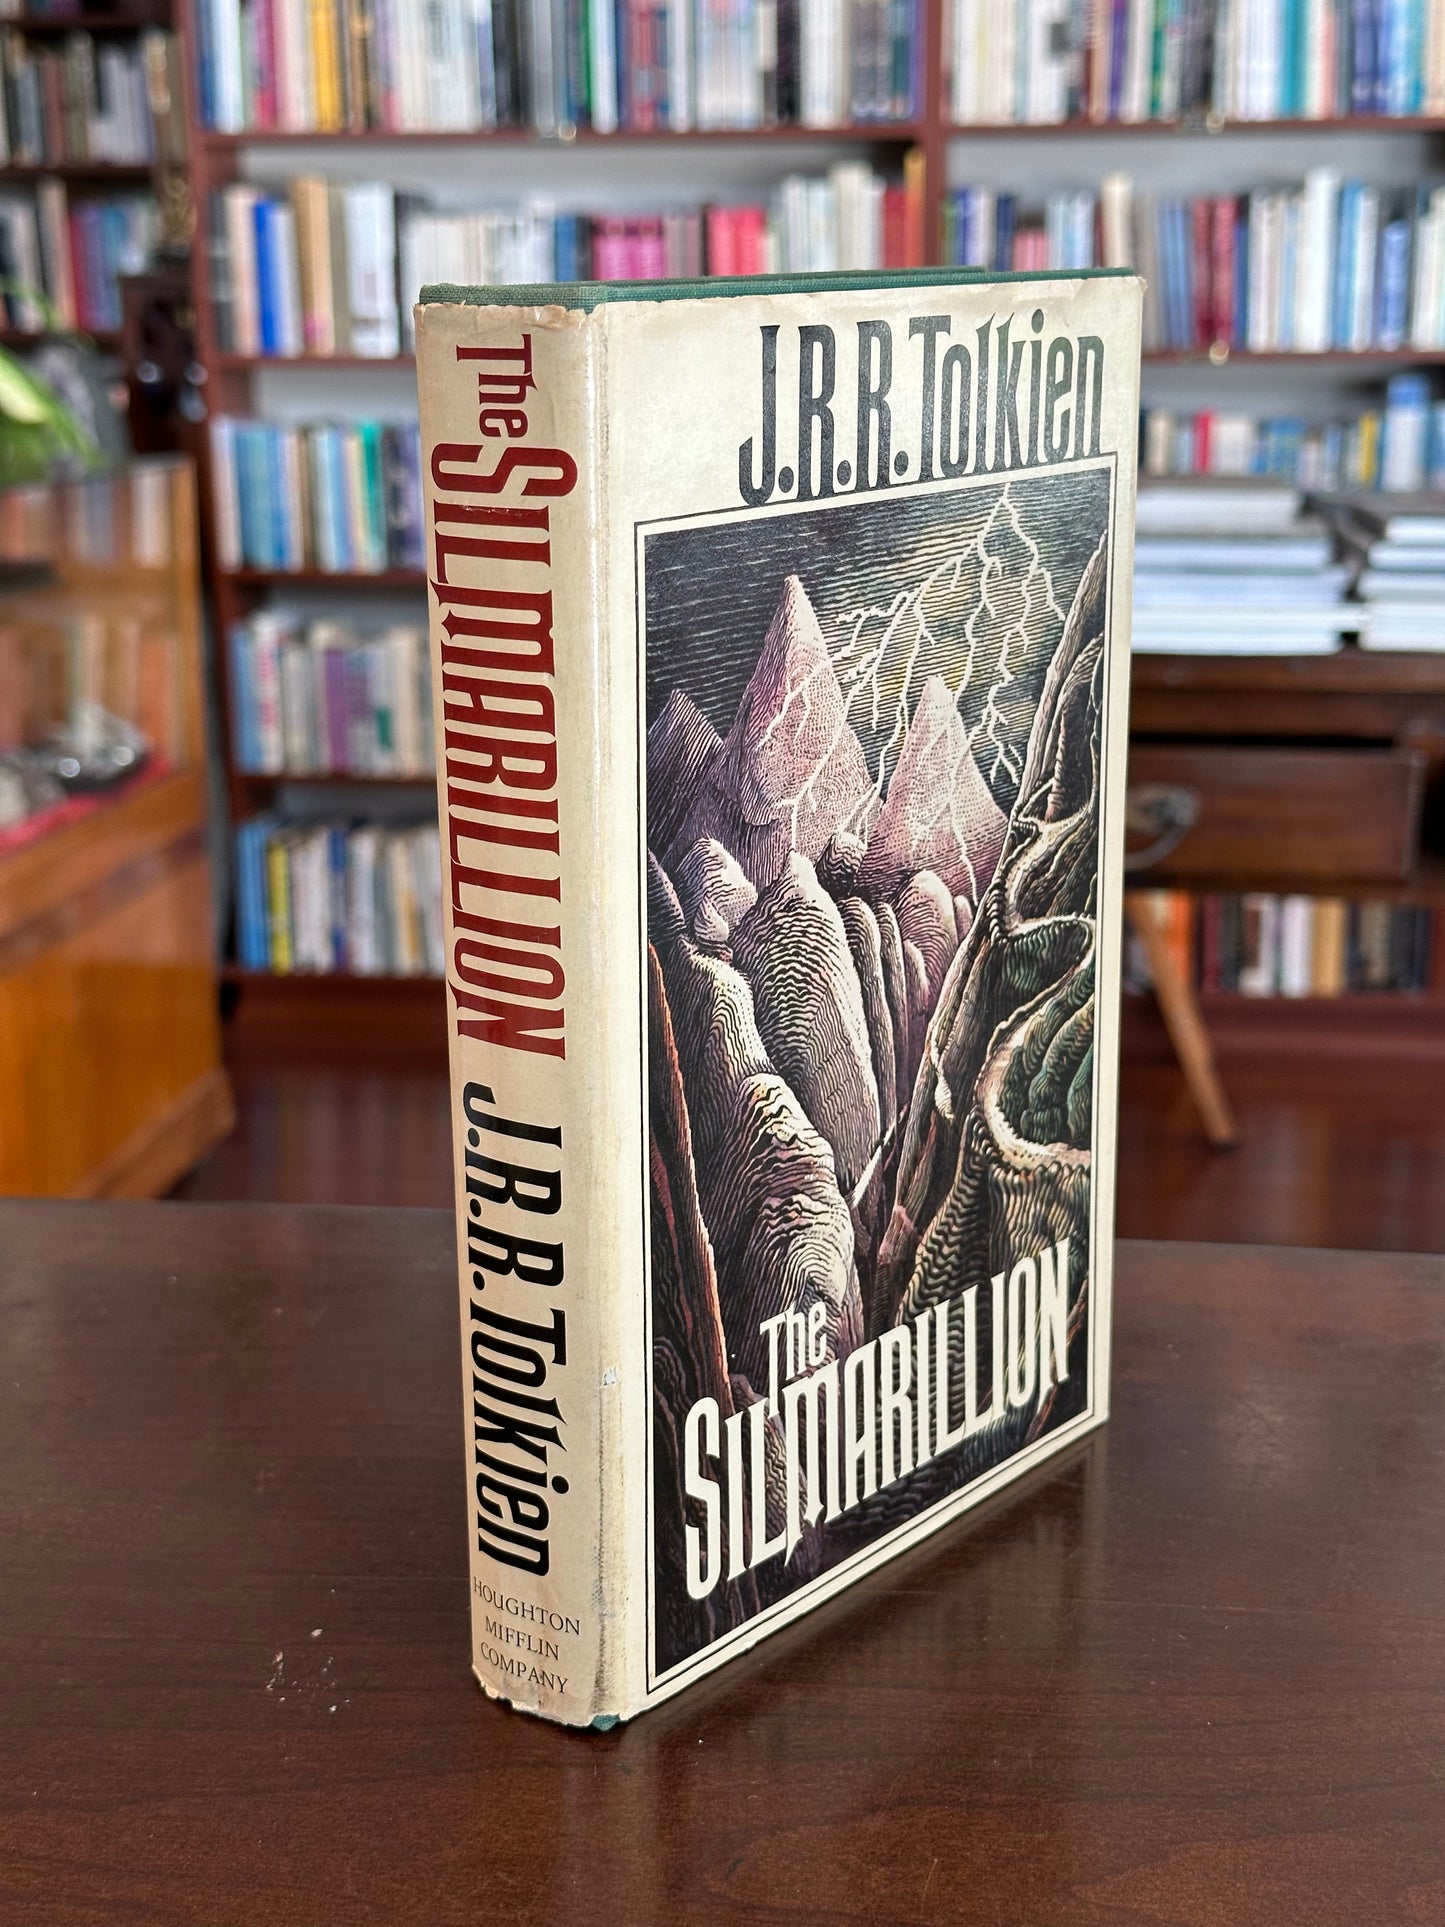 The Silmarillion by J.R.R Tolkien (First Edition)